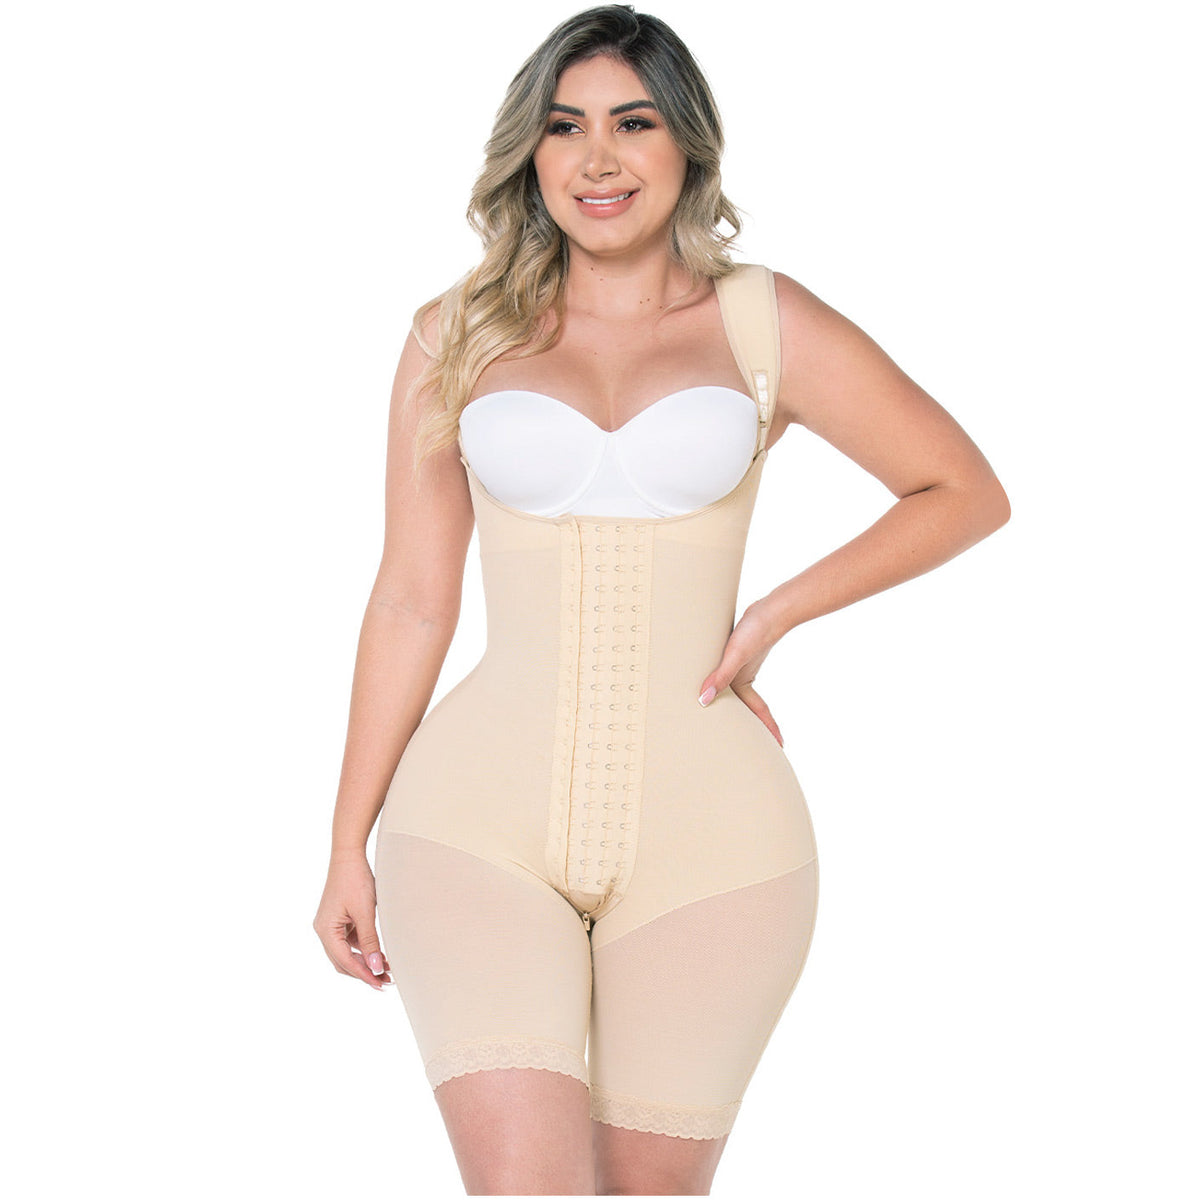 Fajas MYD 0489  Post Surgery Mid Thigh Shapewear Bodysuit for Guitar and Hourglass Body